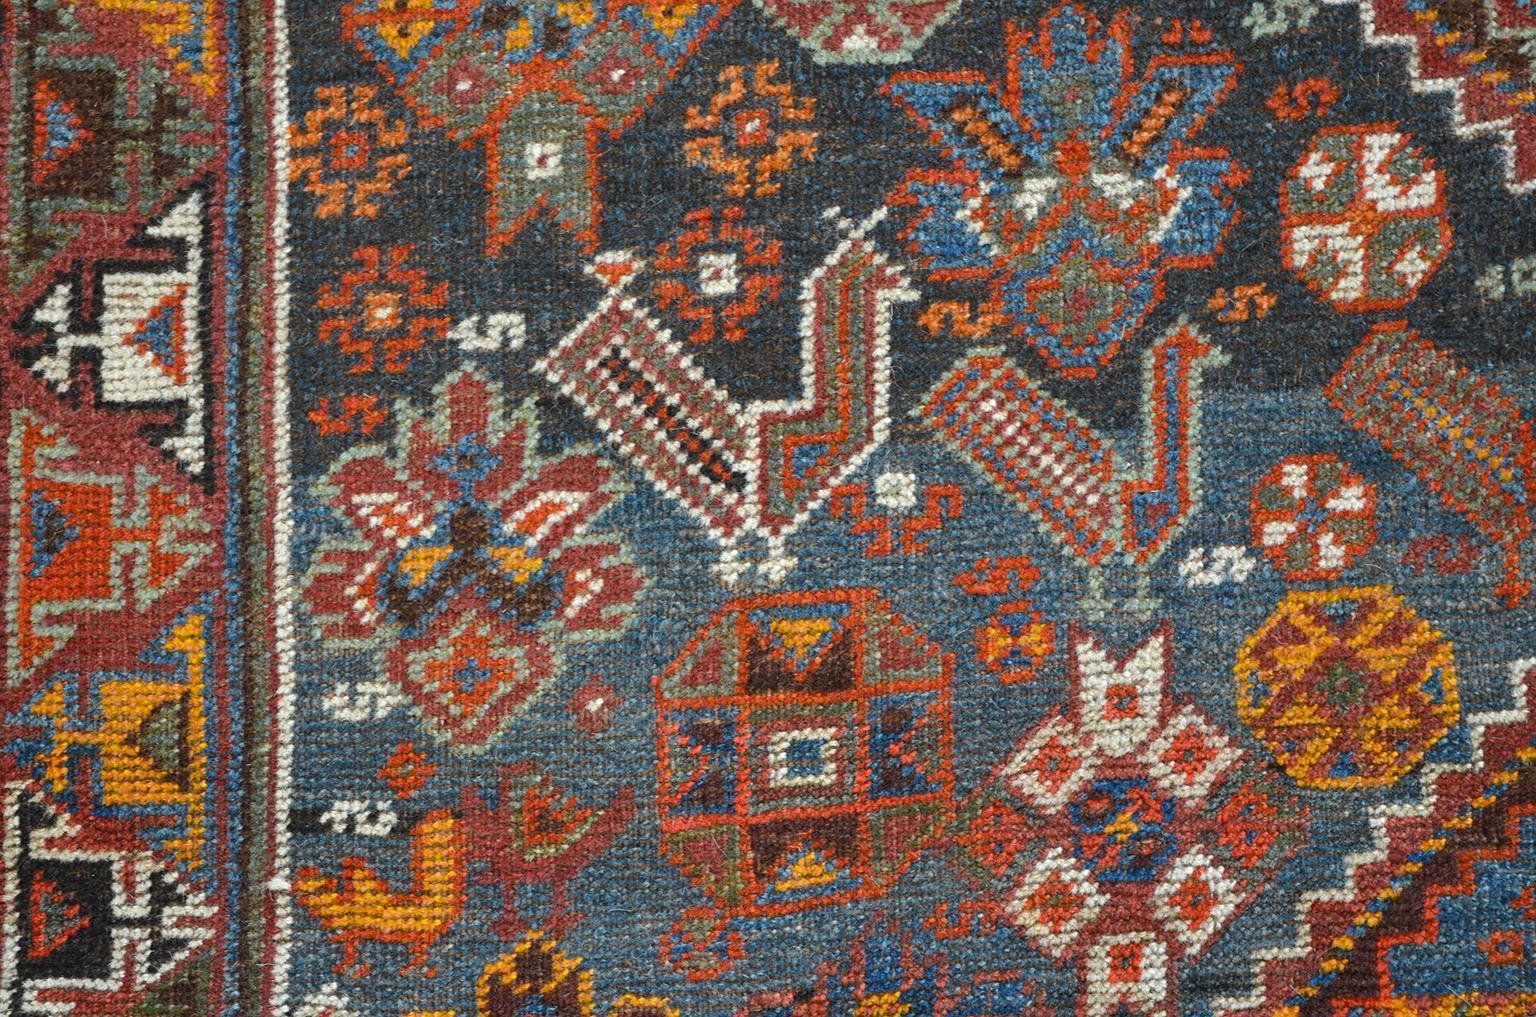 Antique 1880s Wool Persian Qashqai Neriz Rug, 5' x 10' In Good Condition For Sale In New York, NY